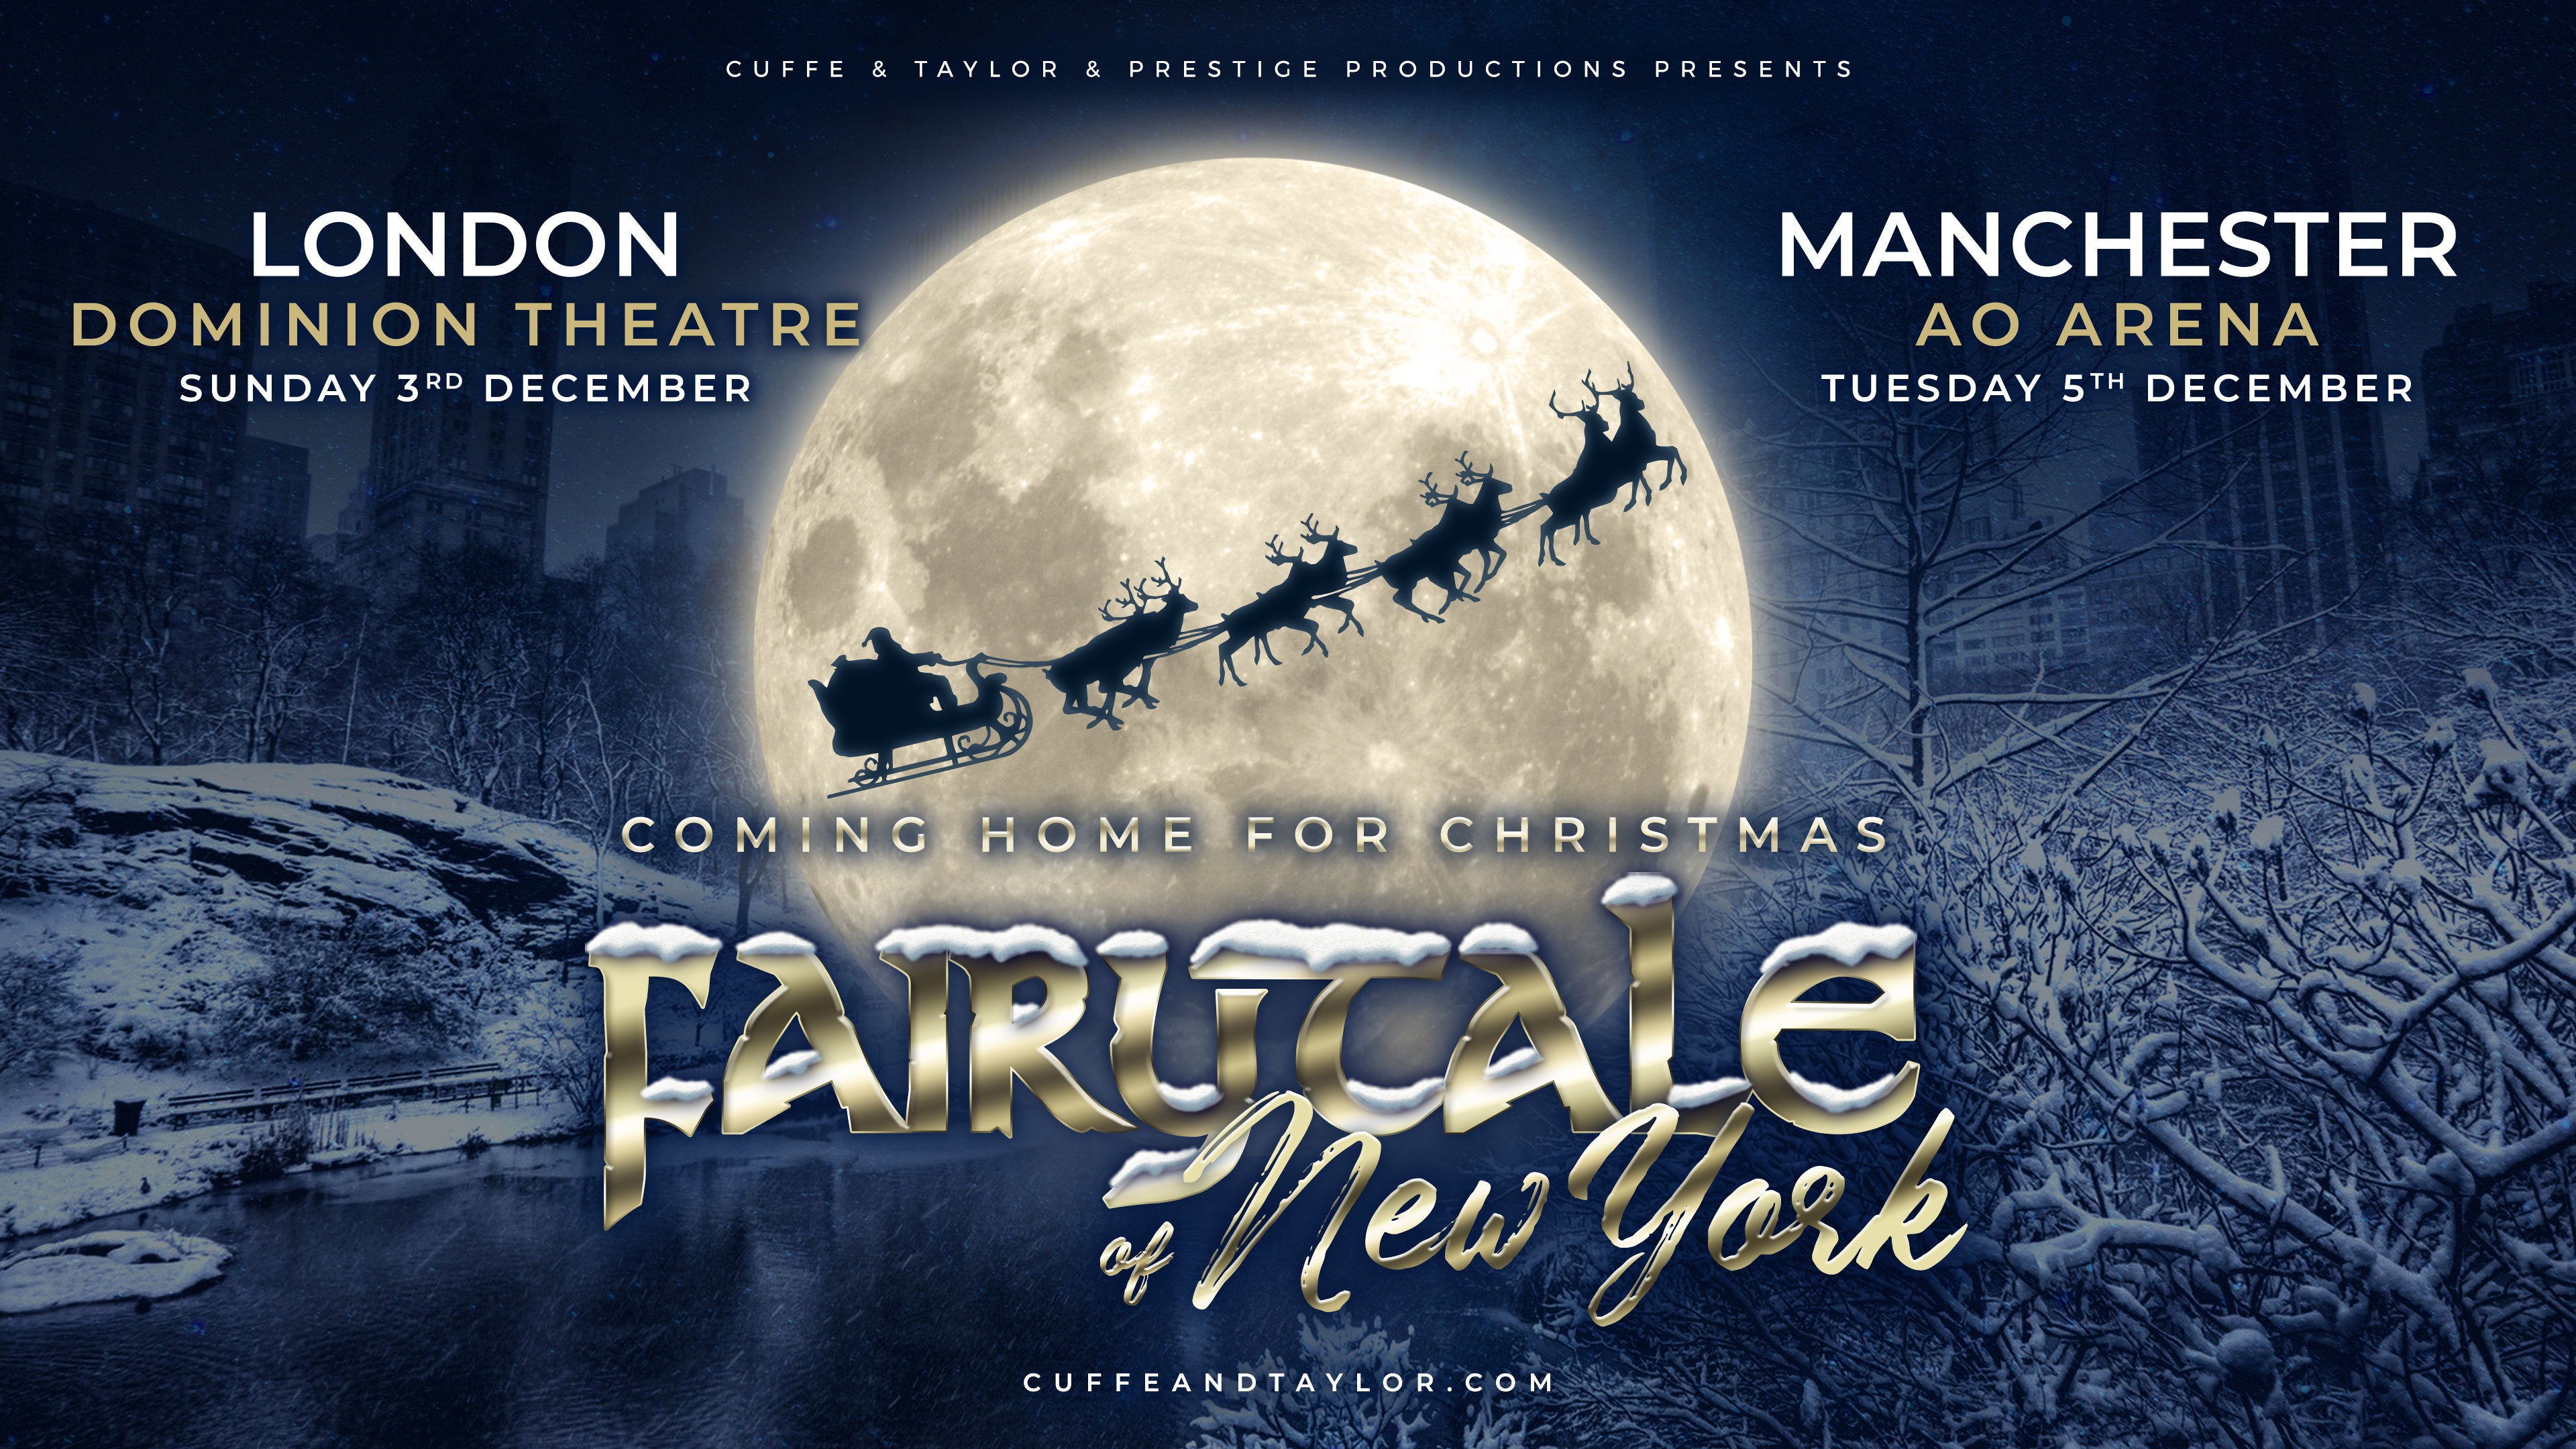 Fairytale of New York in Manchester promo photo for Ticketmaster presale offer code